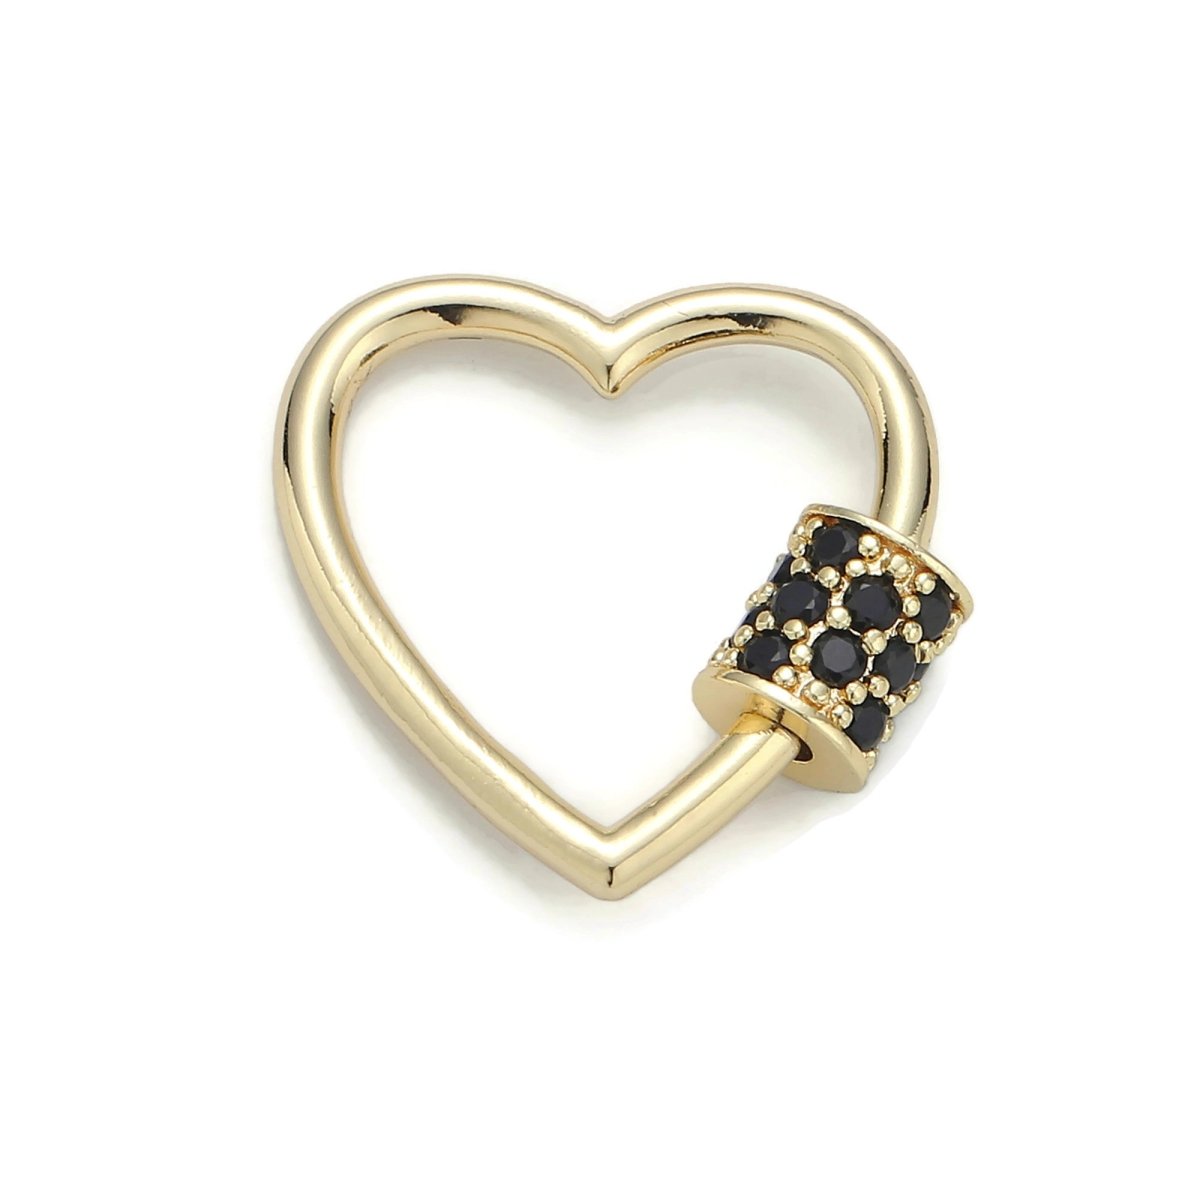 24K Gold-Plated Heart Carabiner, Circular Screw Clasp with Colored Rhinestones - DLUXCA